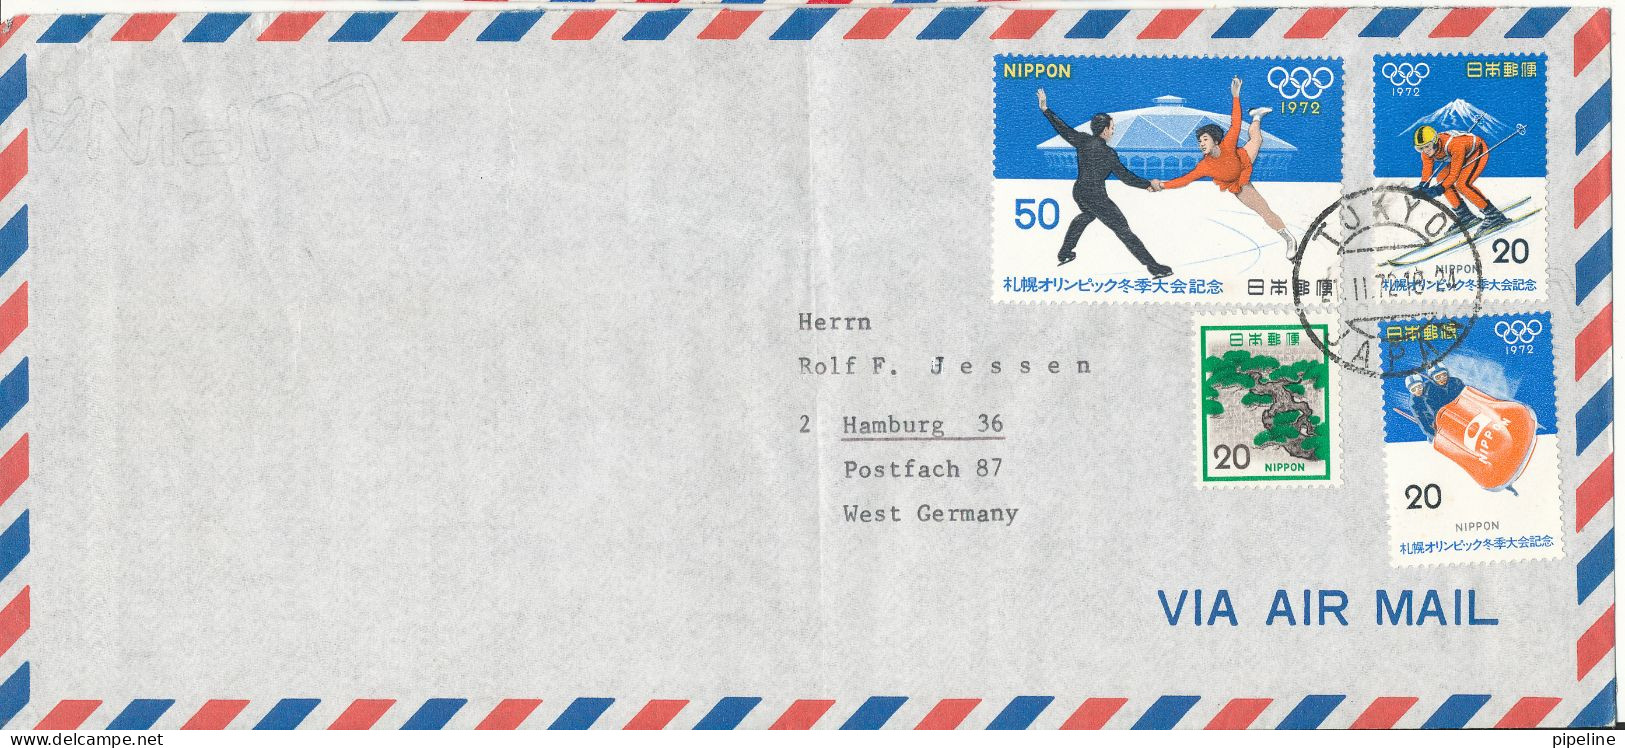 Japan Air Mail Cover Sent To Germany 2-11-1972 With More Topic Stamps Folded Cover - Luftpost